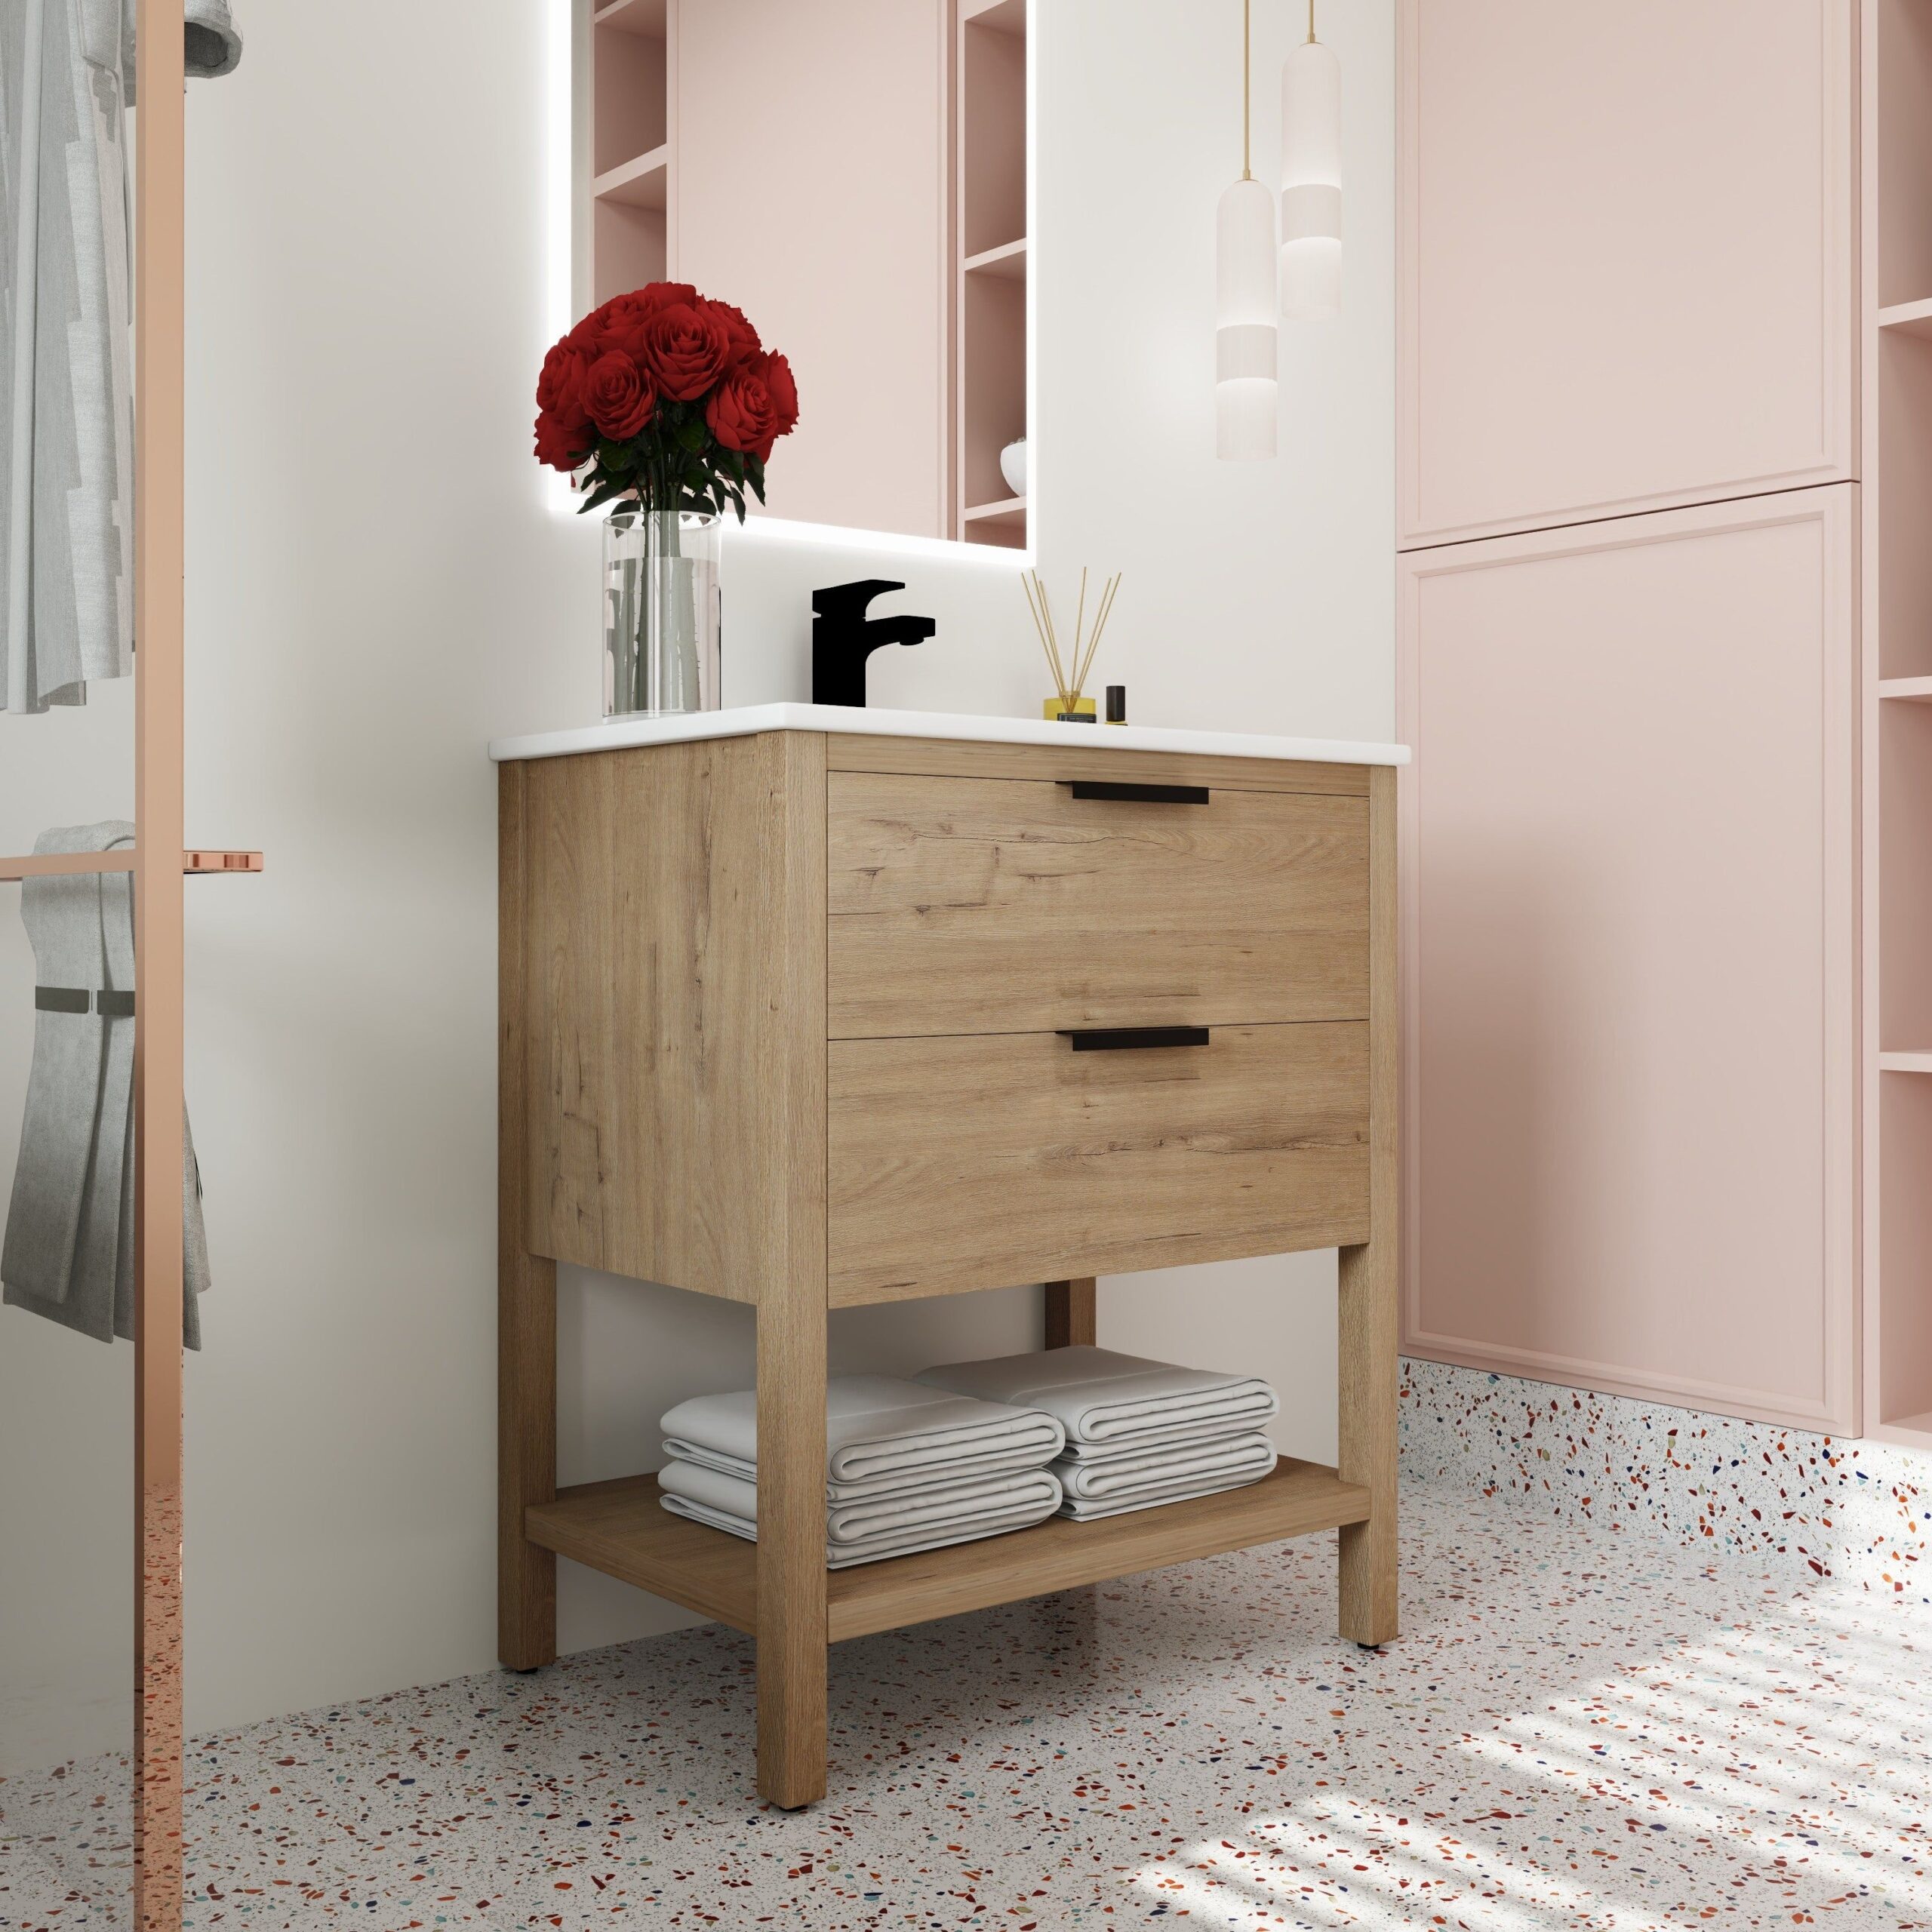 Compact Bathroom Vanity: Maximizing Space with Smart Storage Solutions